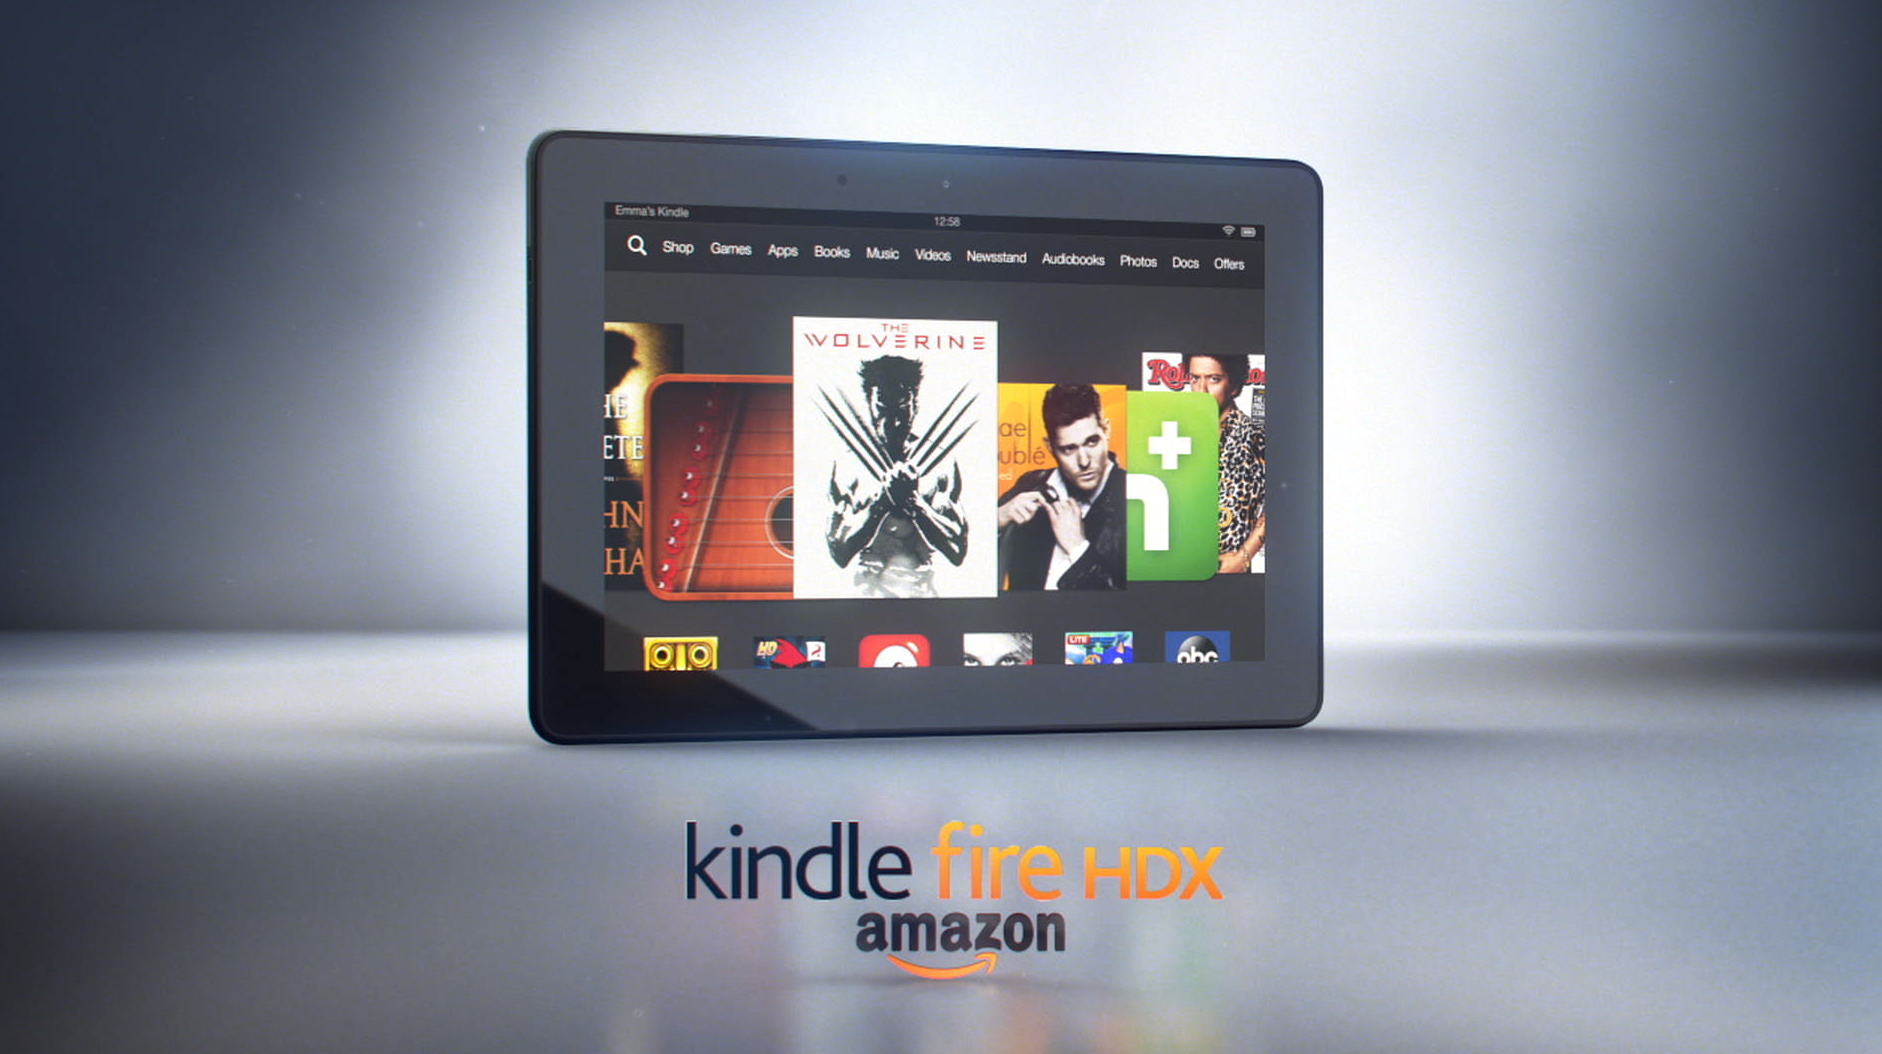 ___111___ AMAZON BRAND FIRE HDX.png